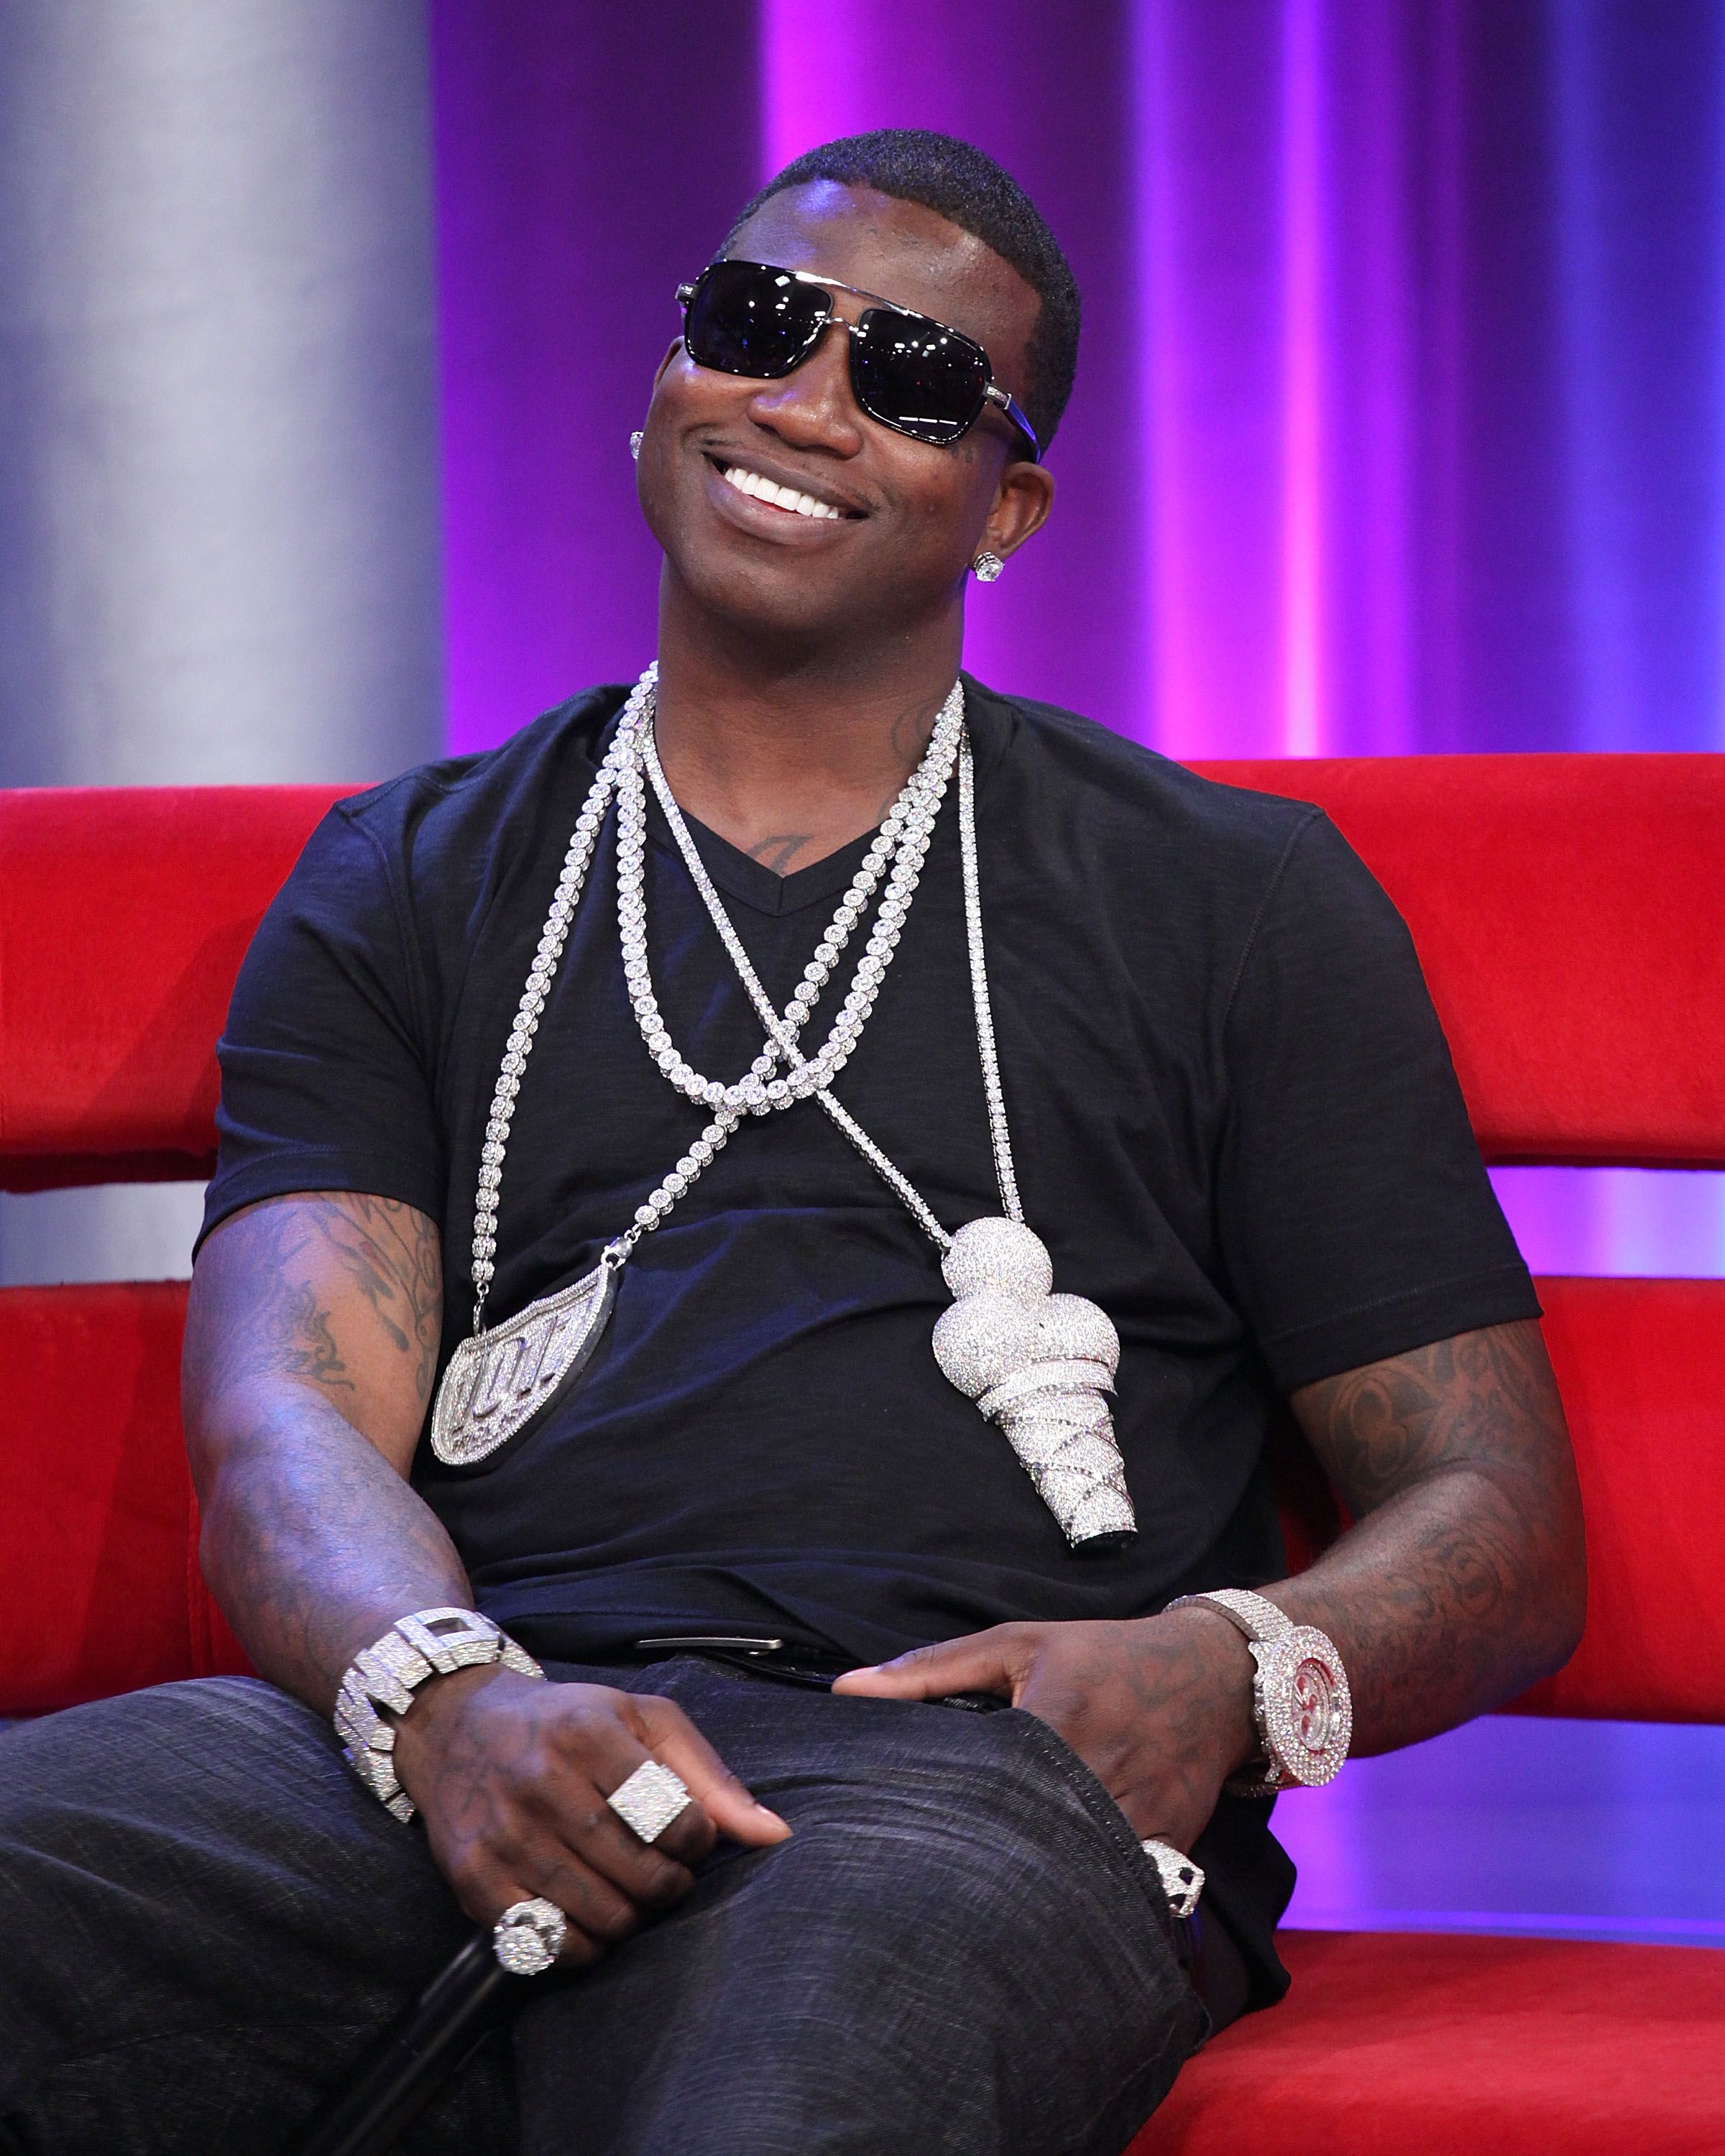 Gucci Mane during BET's "106 & Park" at BET Studios on June 1, 2010 in New York City. | Source: Getty Images